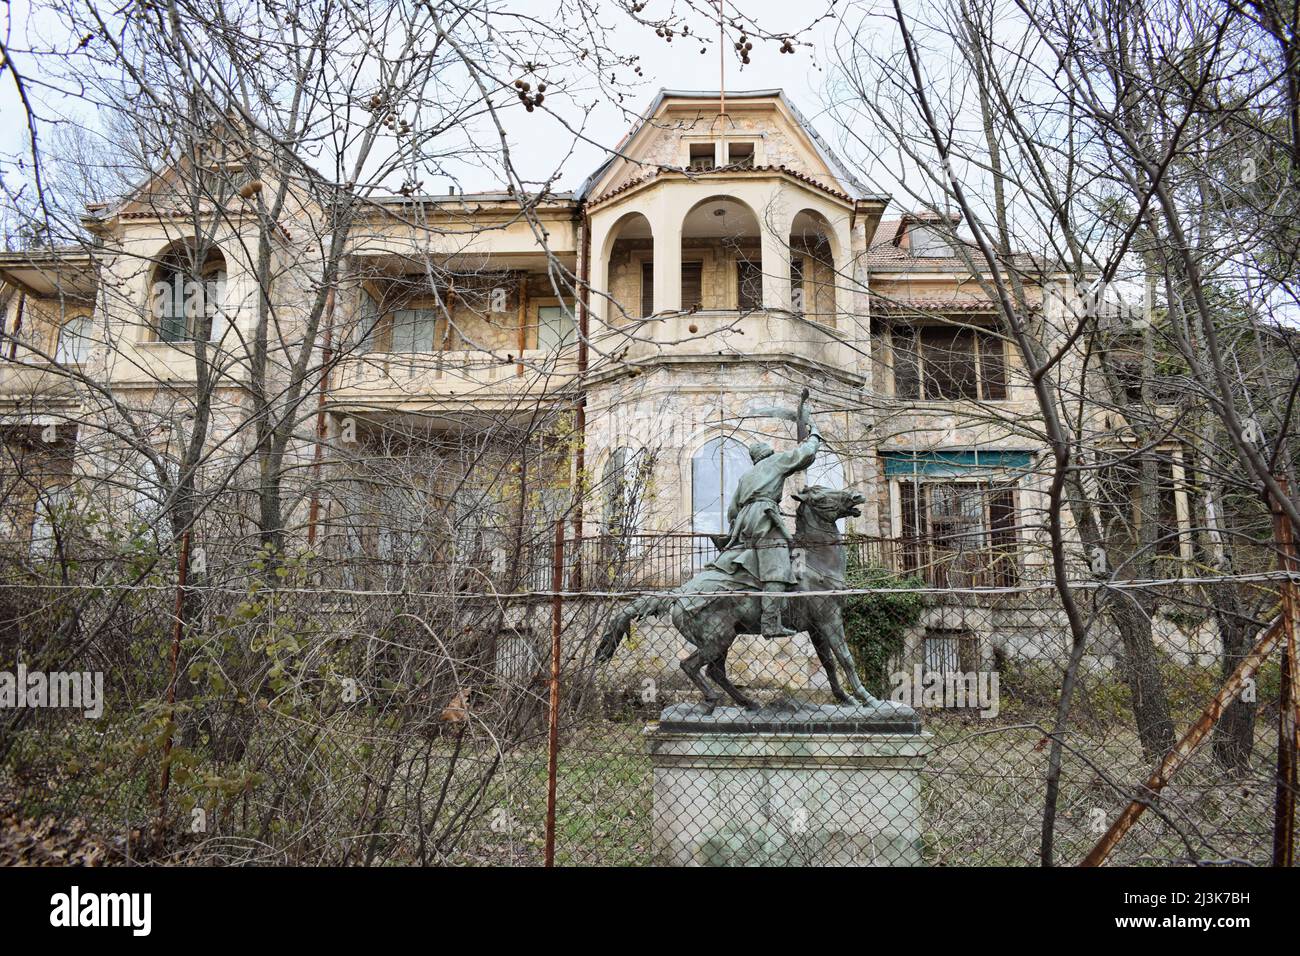 A sculpture of a hunter riding a horse in front of the summer Palace of former Royal Greek family at Tatoi, Acharnes, Greece Stock Photo